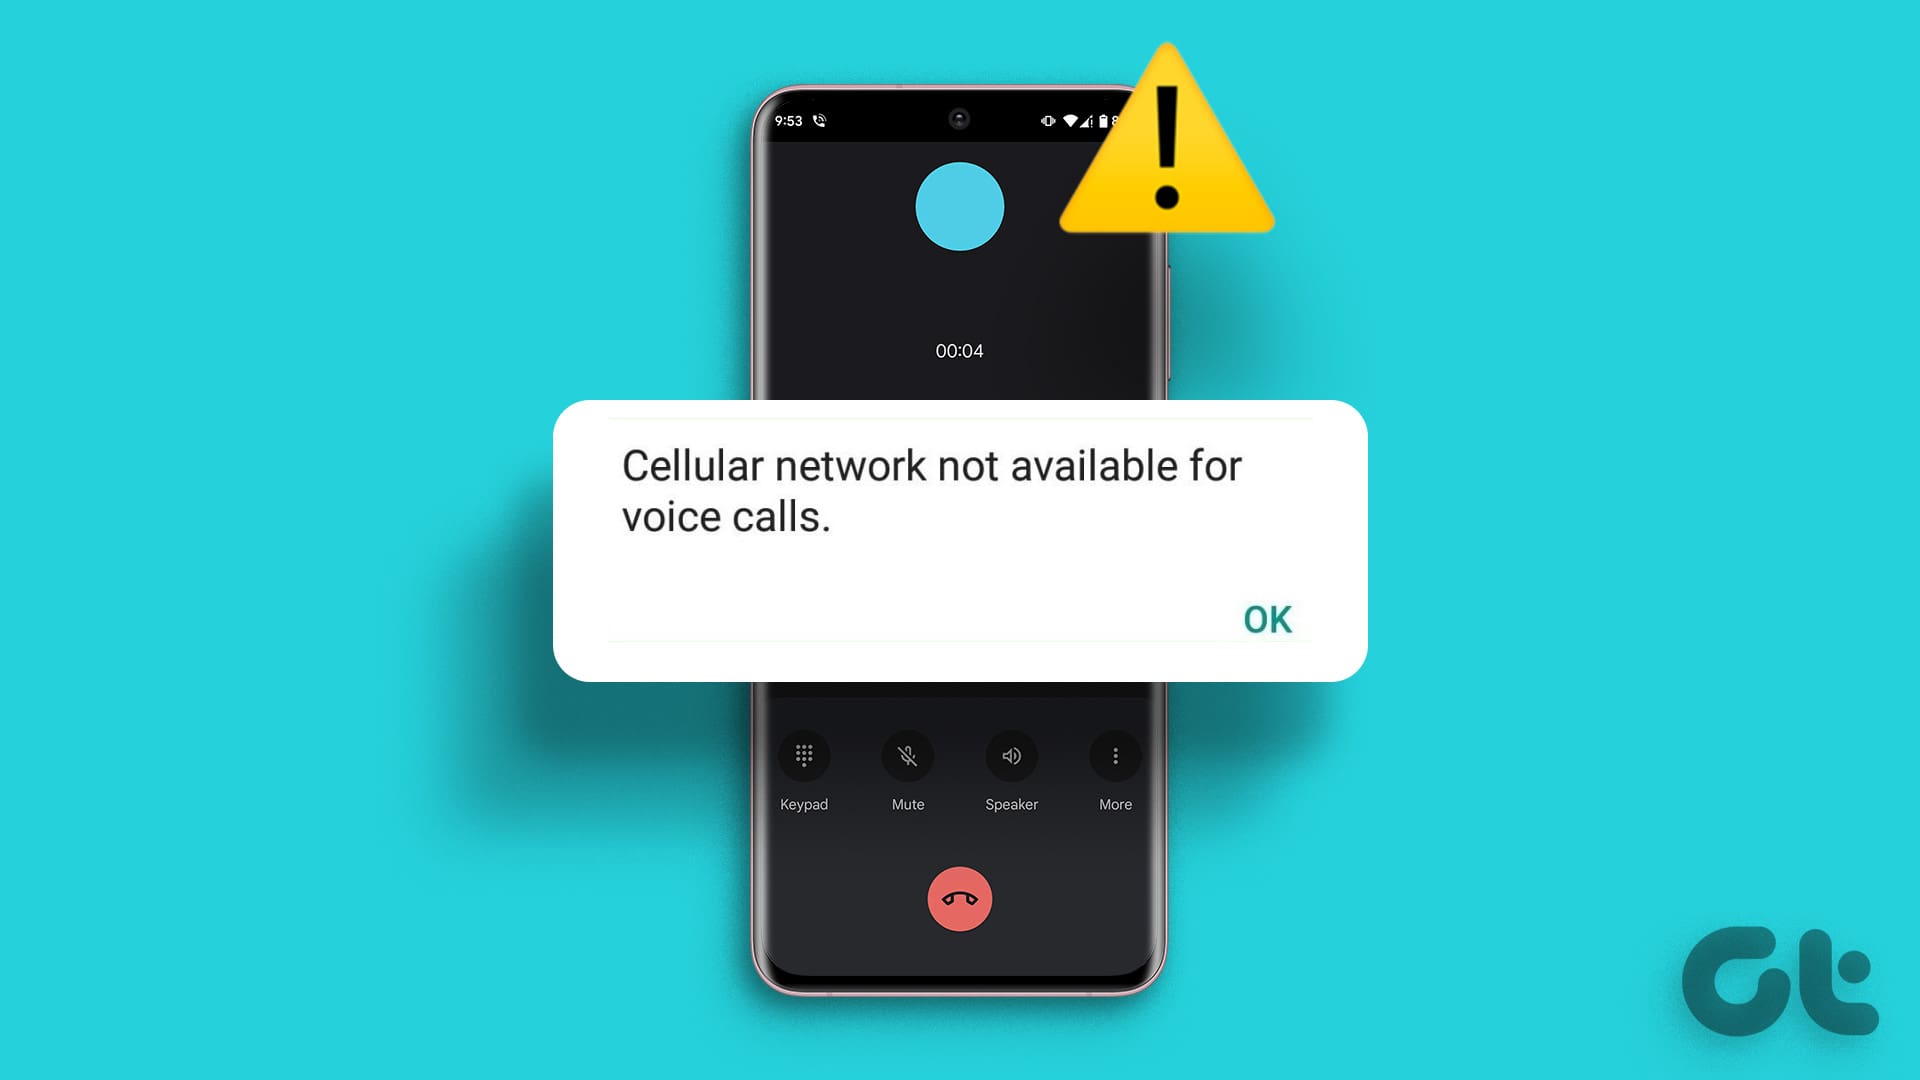 How to Fix Cellular Network Not Available for Voice Calls Error on Your Phone